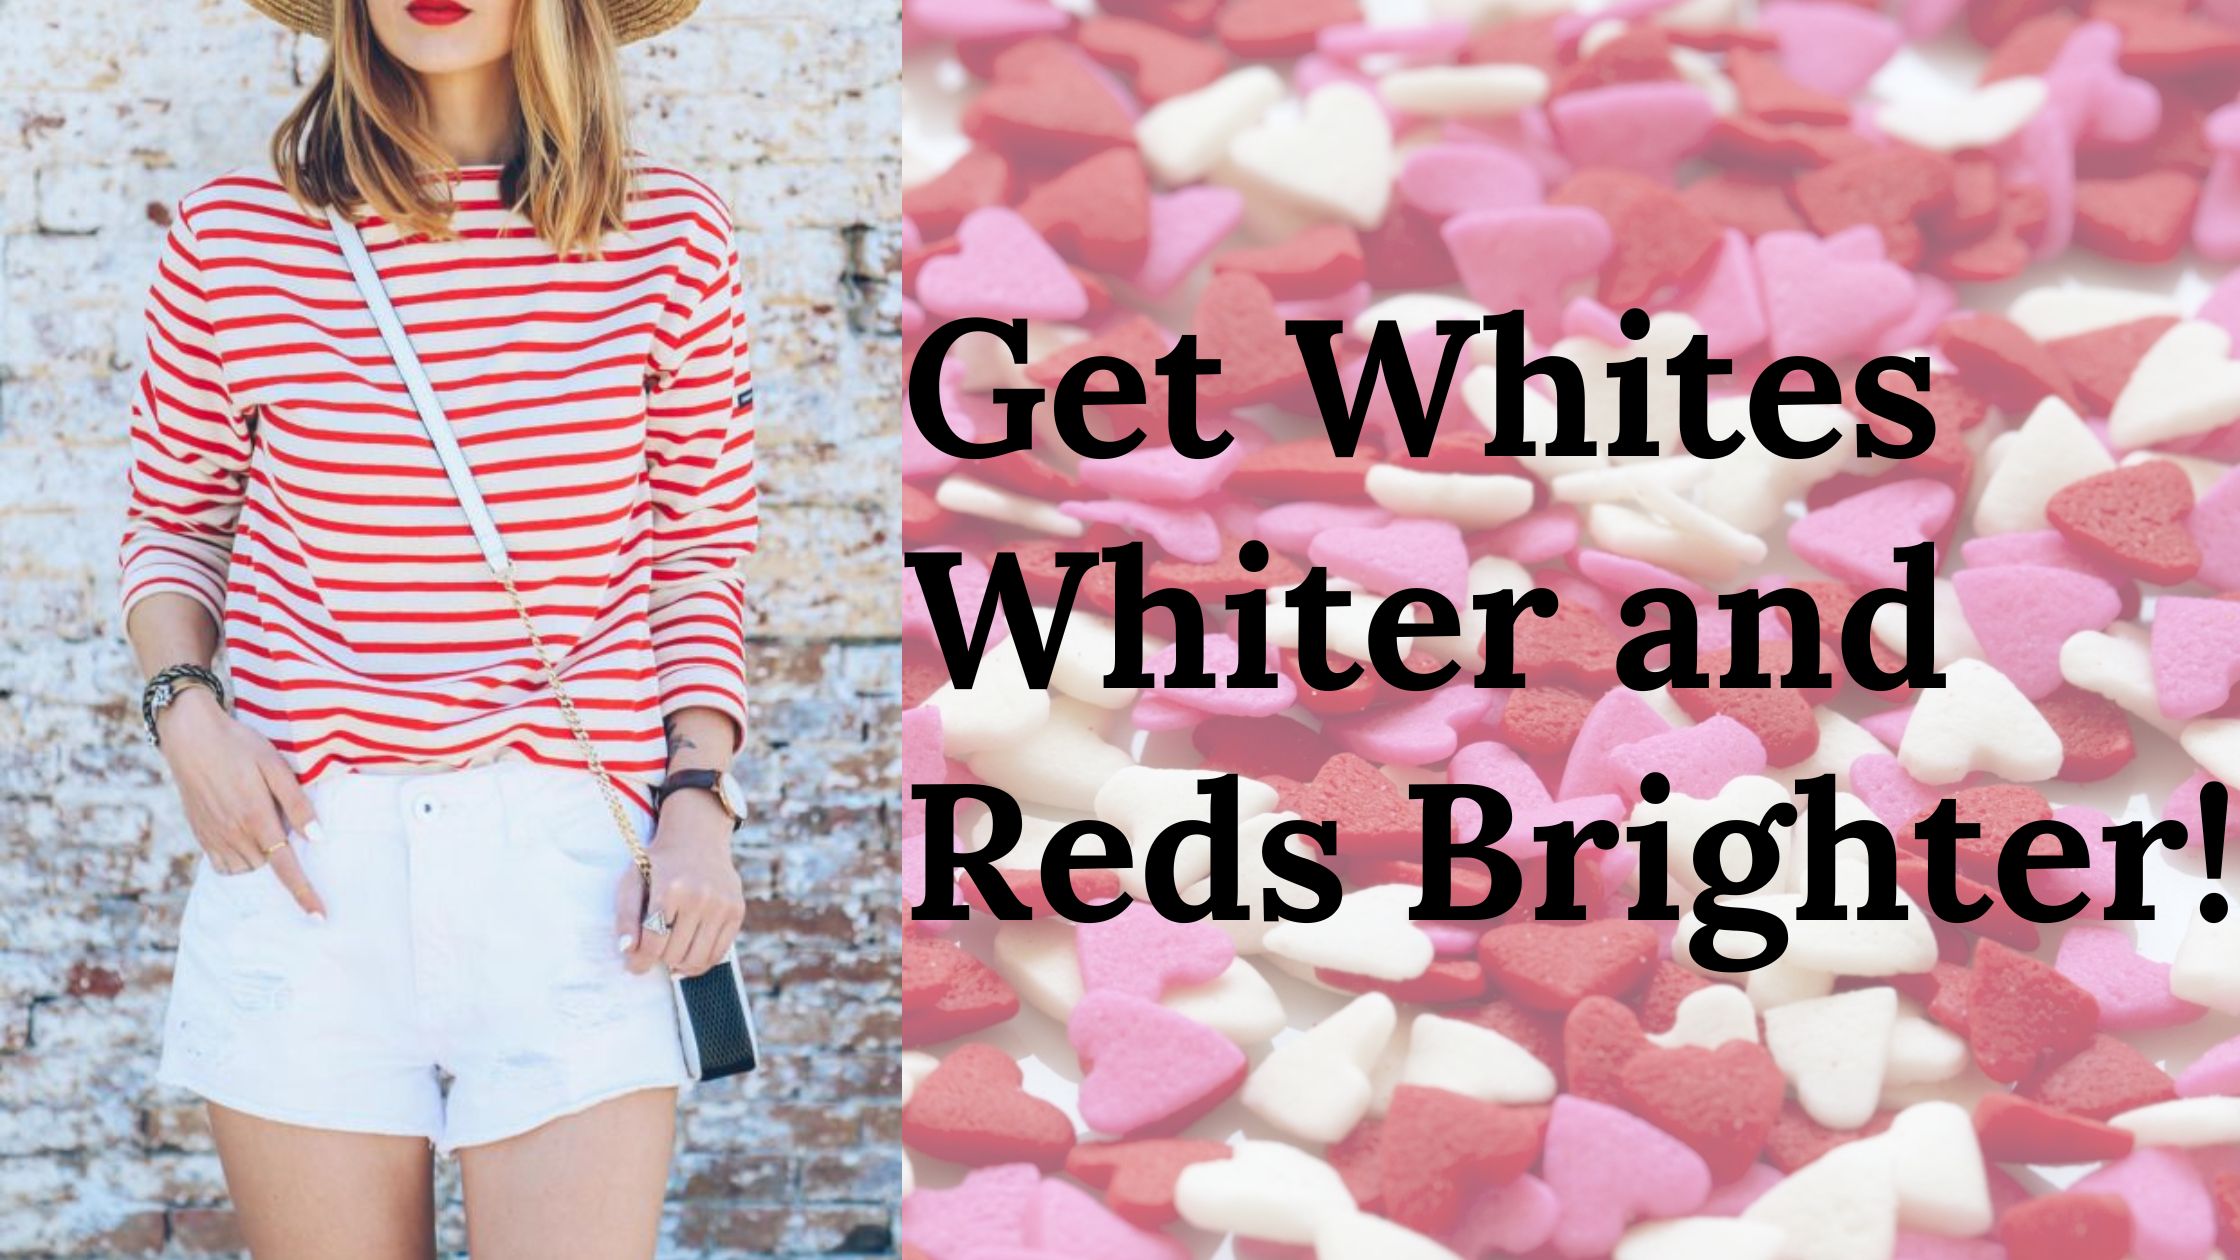 How To Wash Red and White Striped Clothes